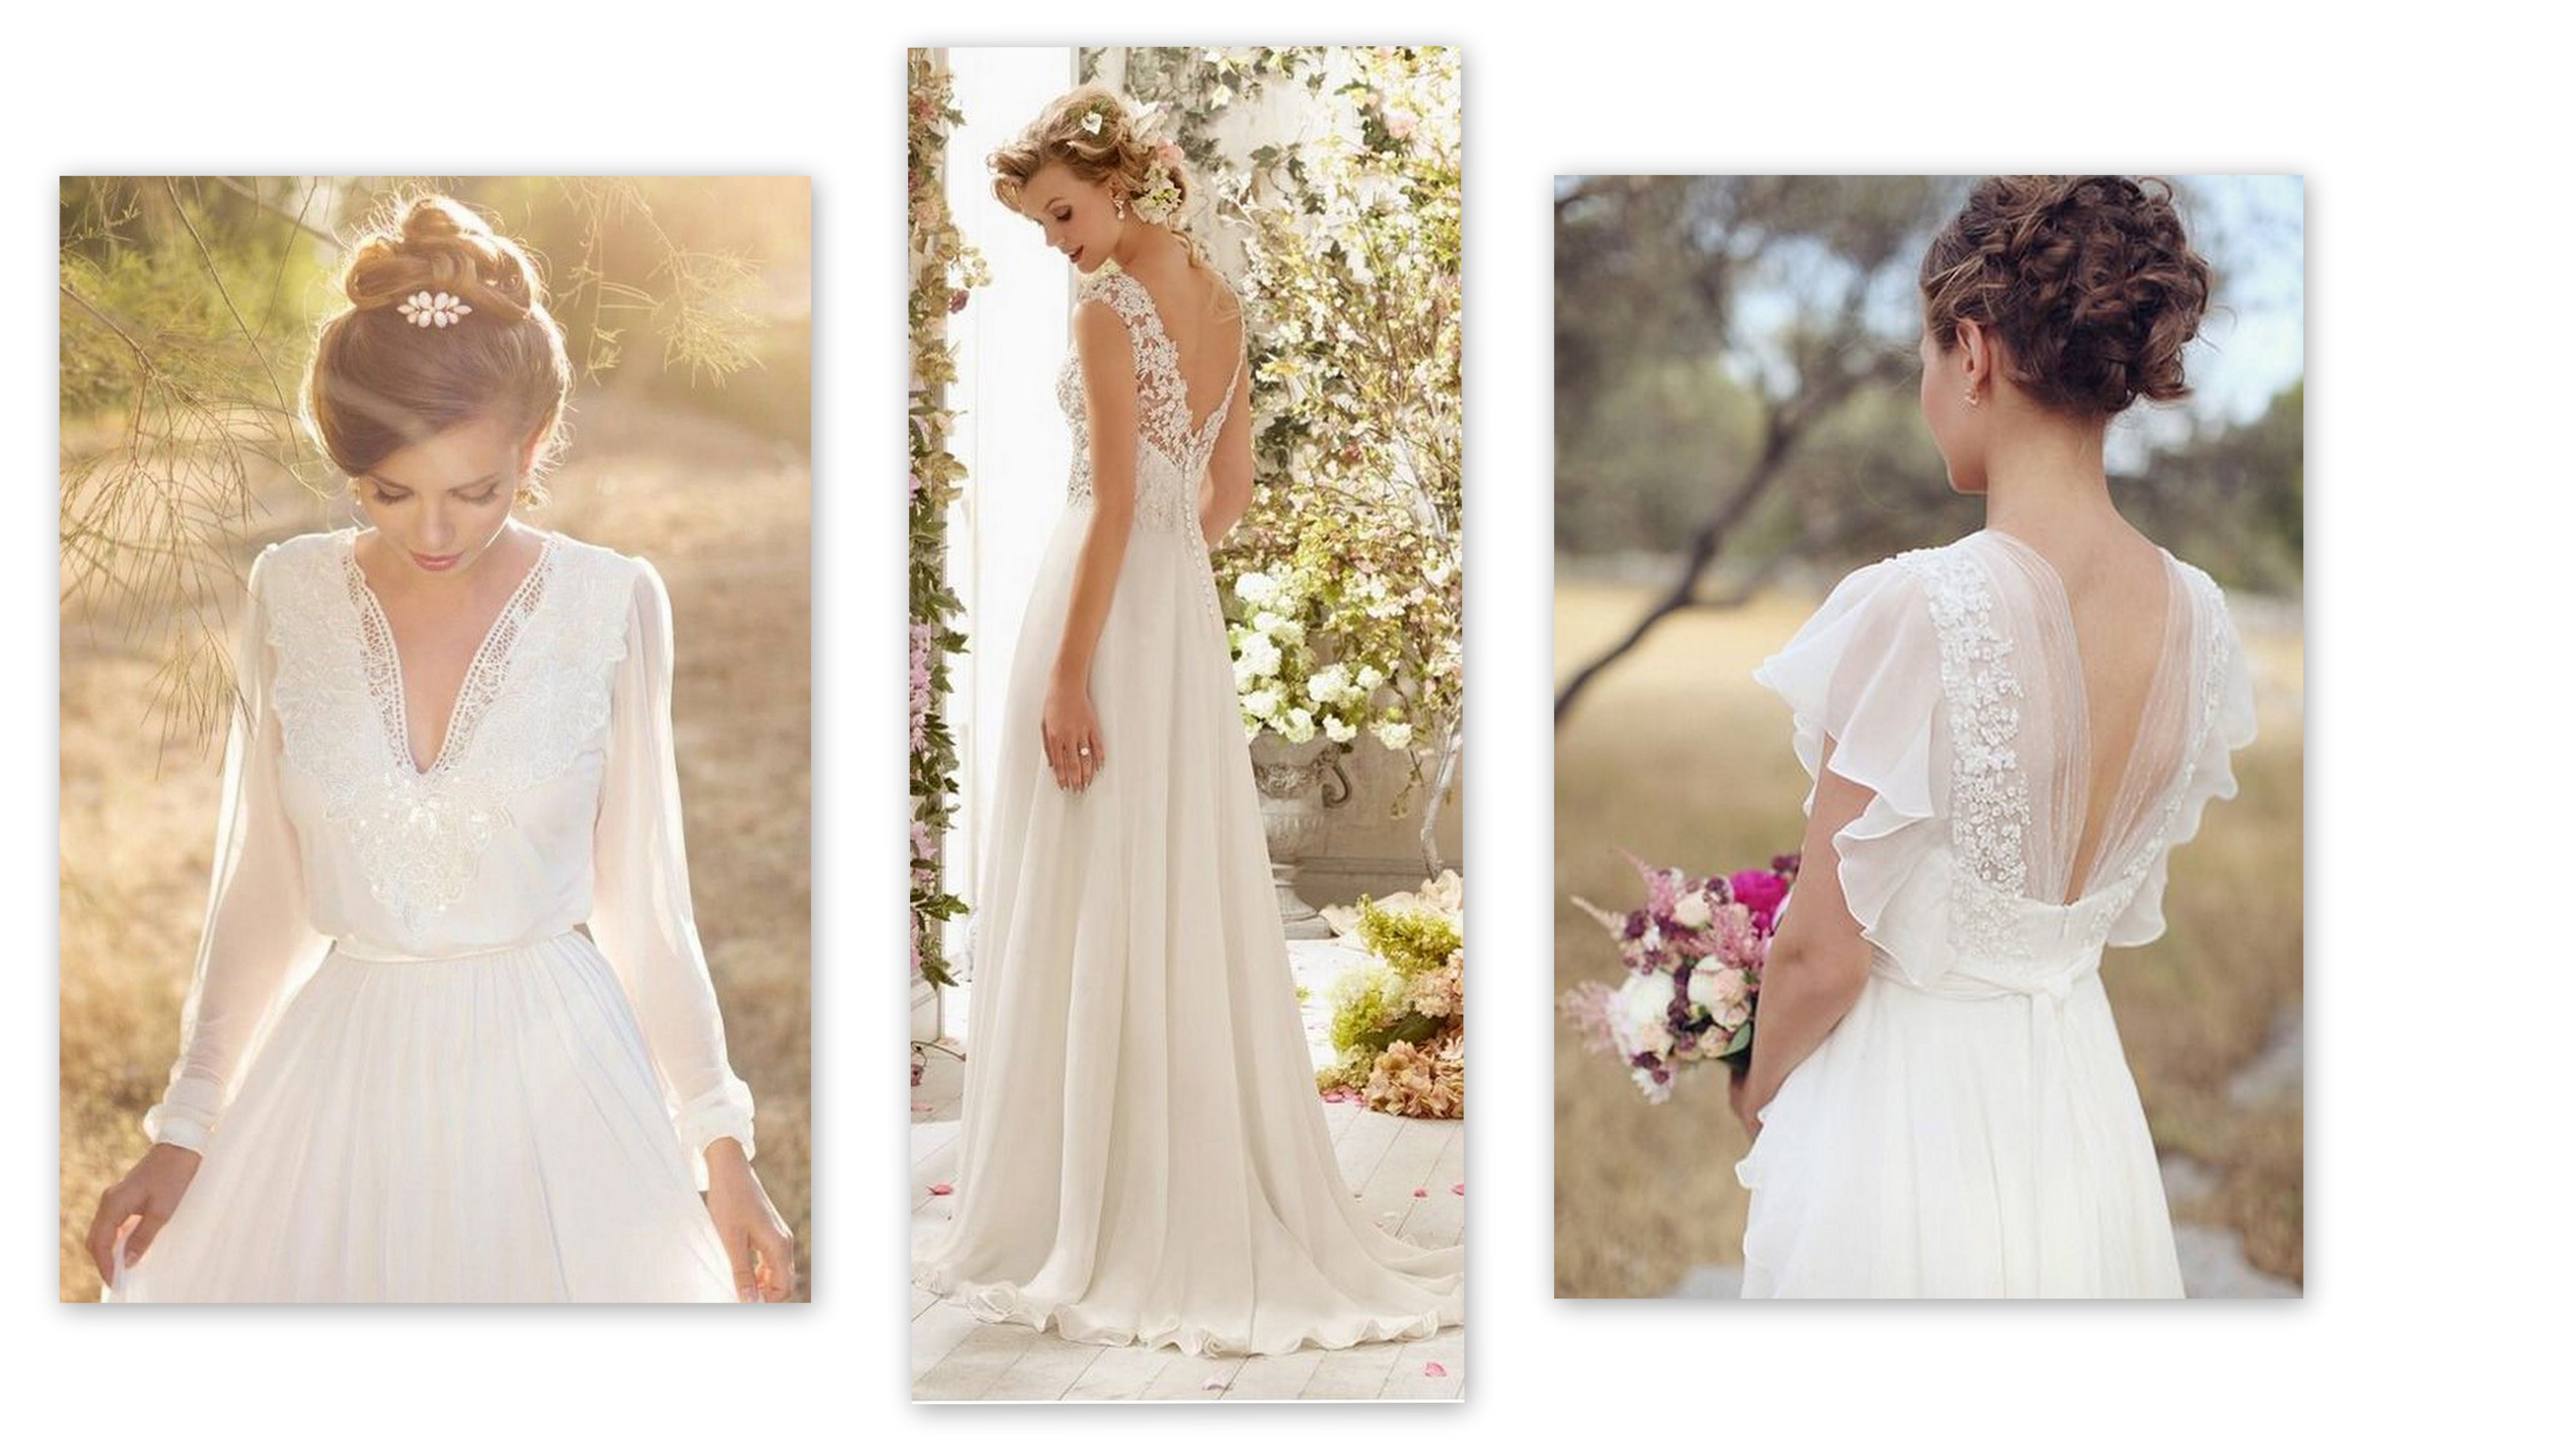 Top 5 Tips to Find Ideal Wedding  Dress  for Your Body  Type